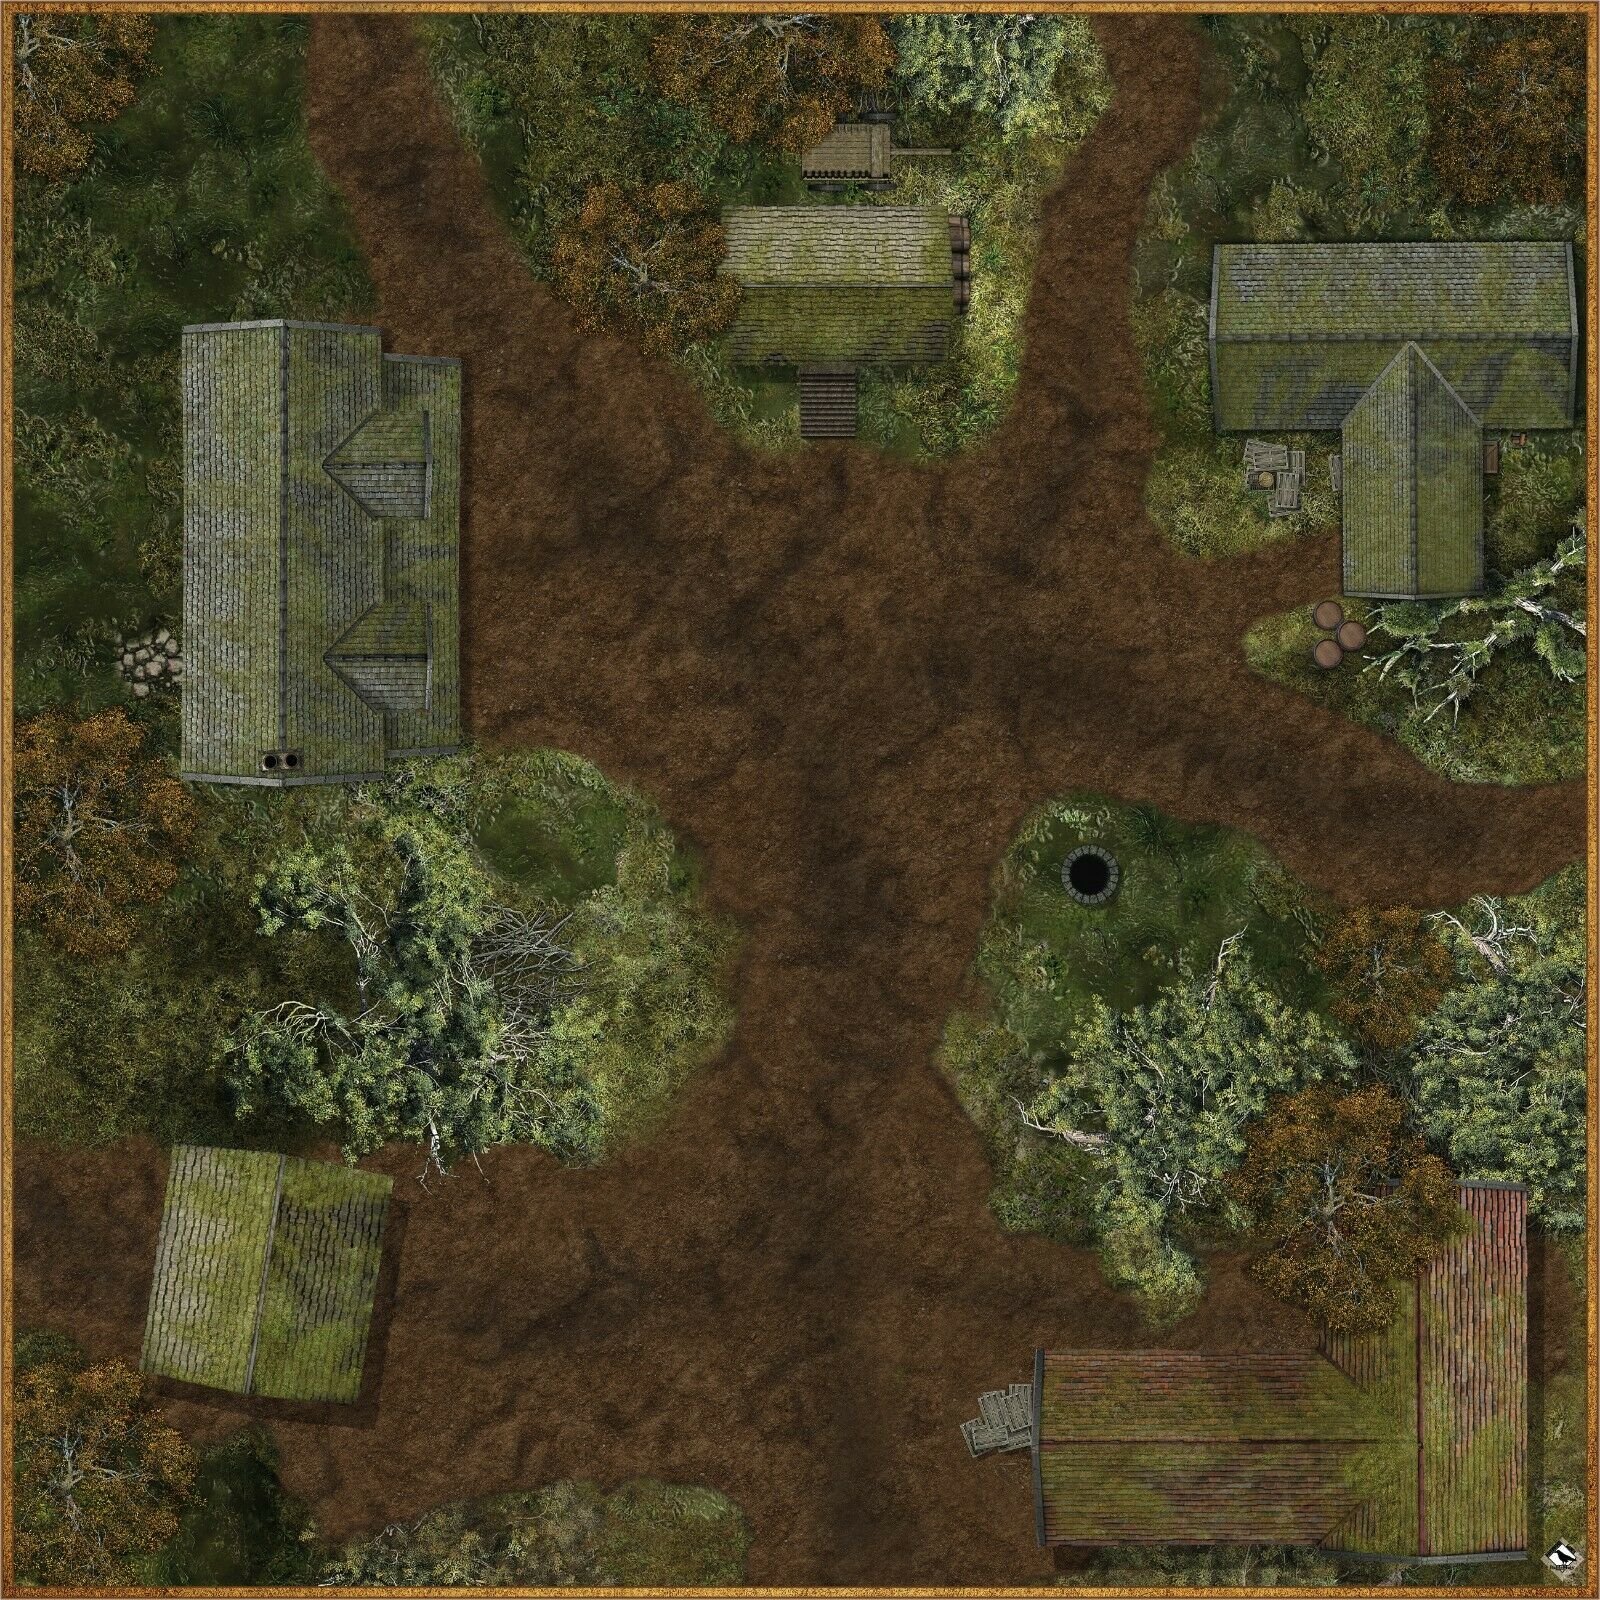 Swamp Outpost - 36" x 36" Battle Mat for Table Top RPGs, Dungeons and Dragons, Pathfinder Etc.